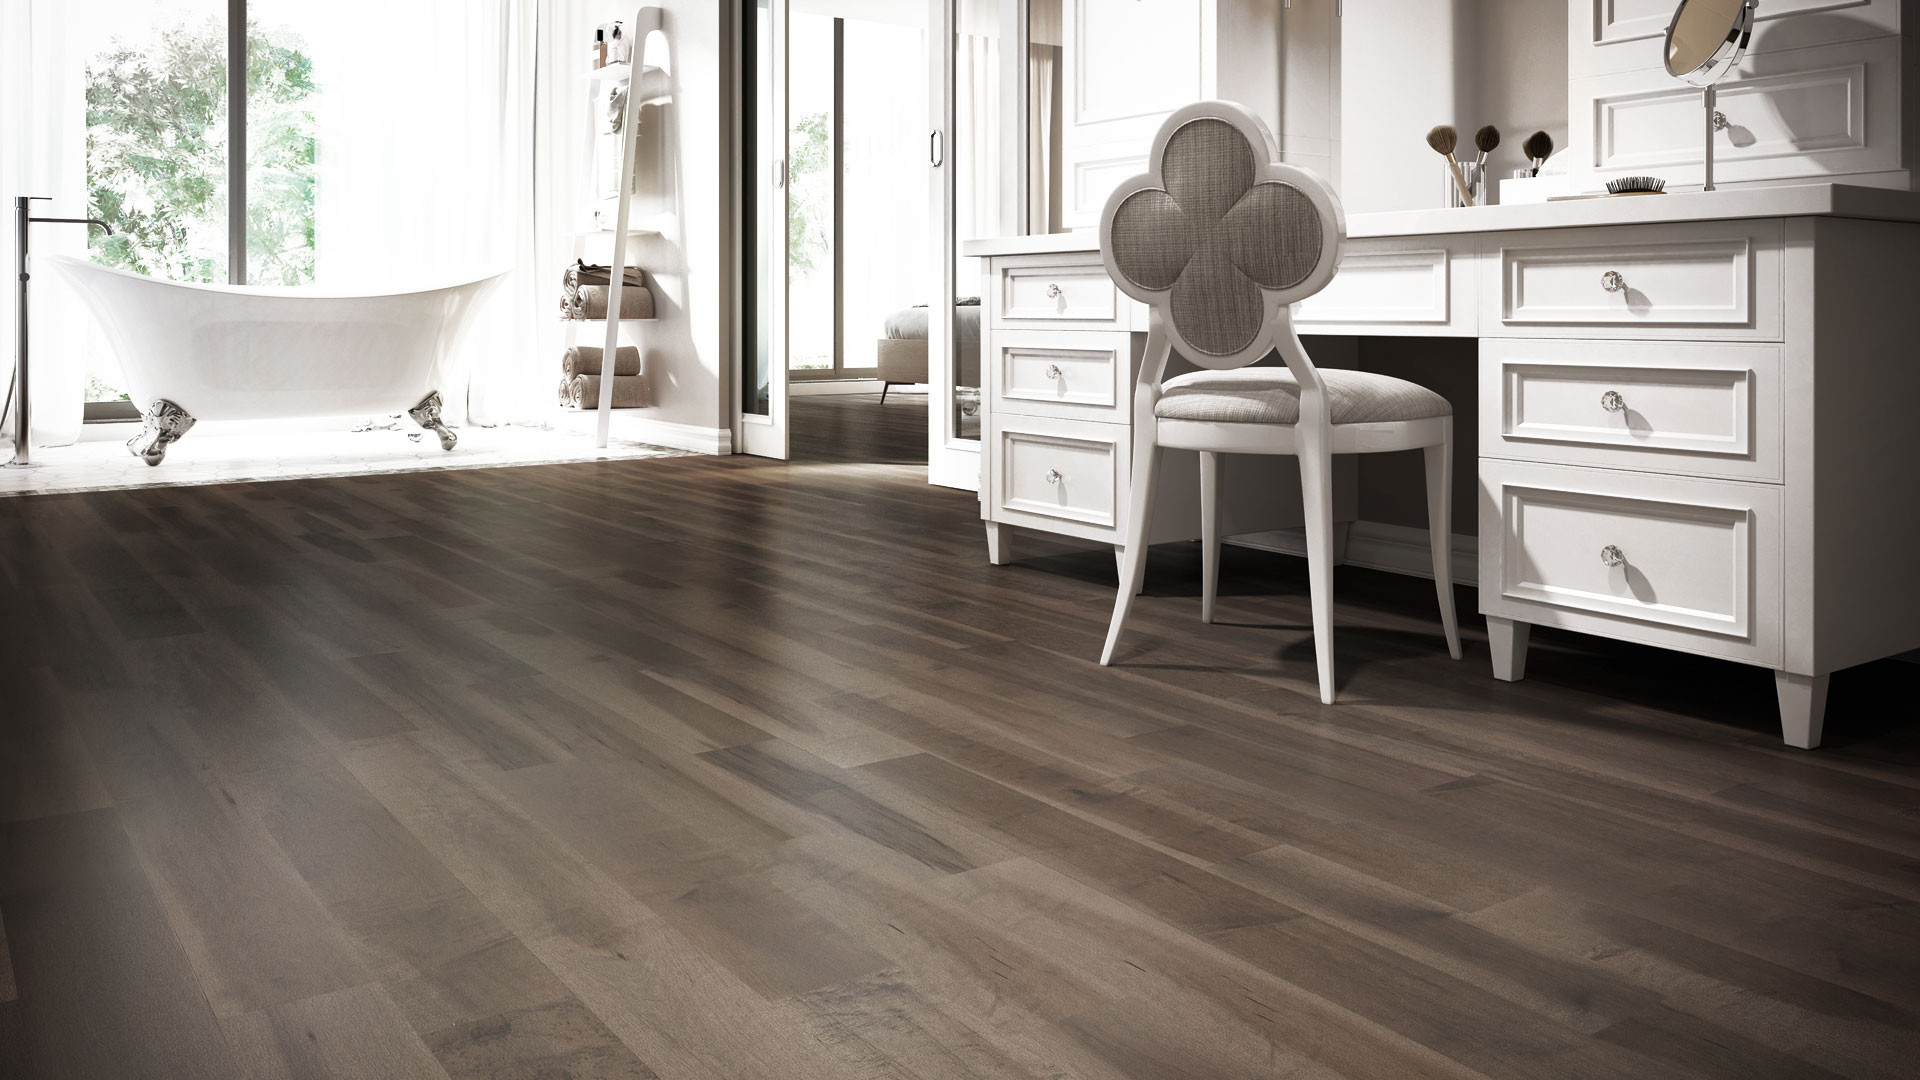 29 Amazing Hardwood Floor Color Choices 2024 free download hardwood floor color choices of 4 latest hardwood flooring trends lauzon flooring with learn more about our pure genius by reading our blog post the smartest hardwood flooring weve ever seen